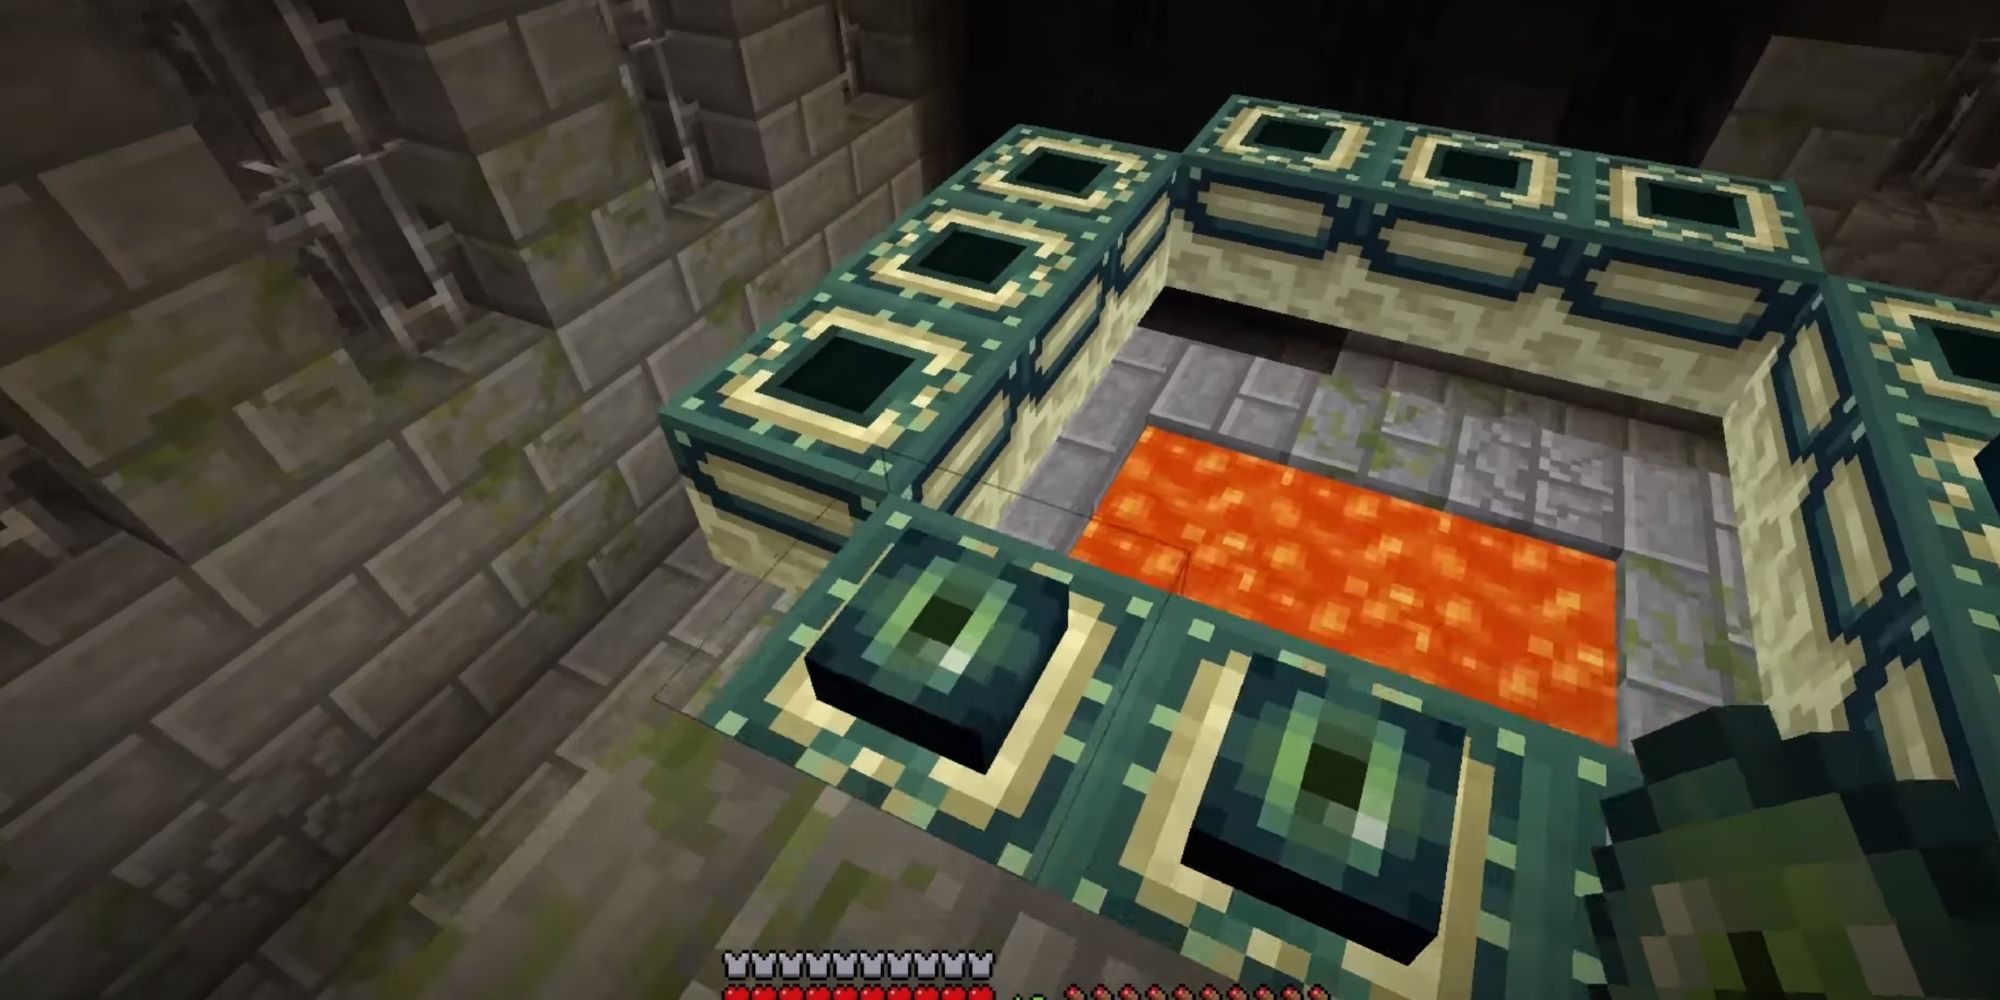 How to Make a Nether Portal or End Portal in Minecraft